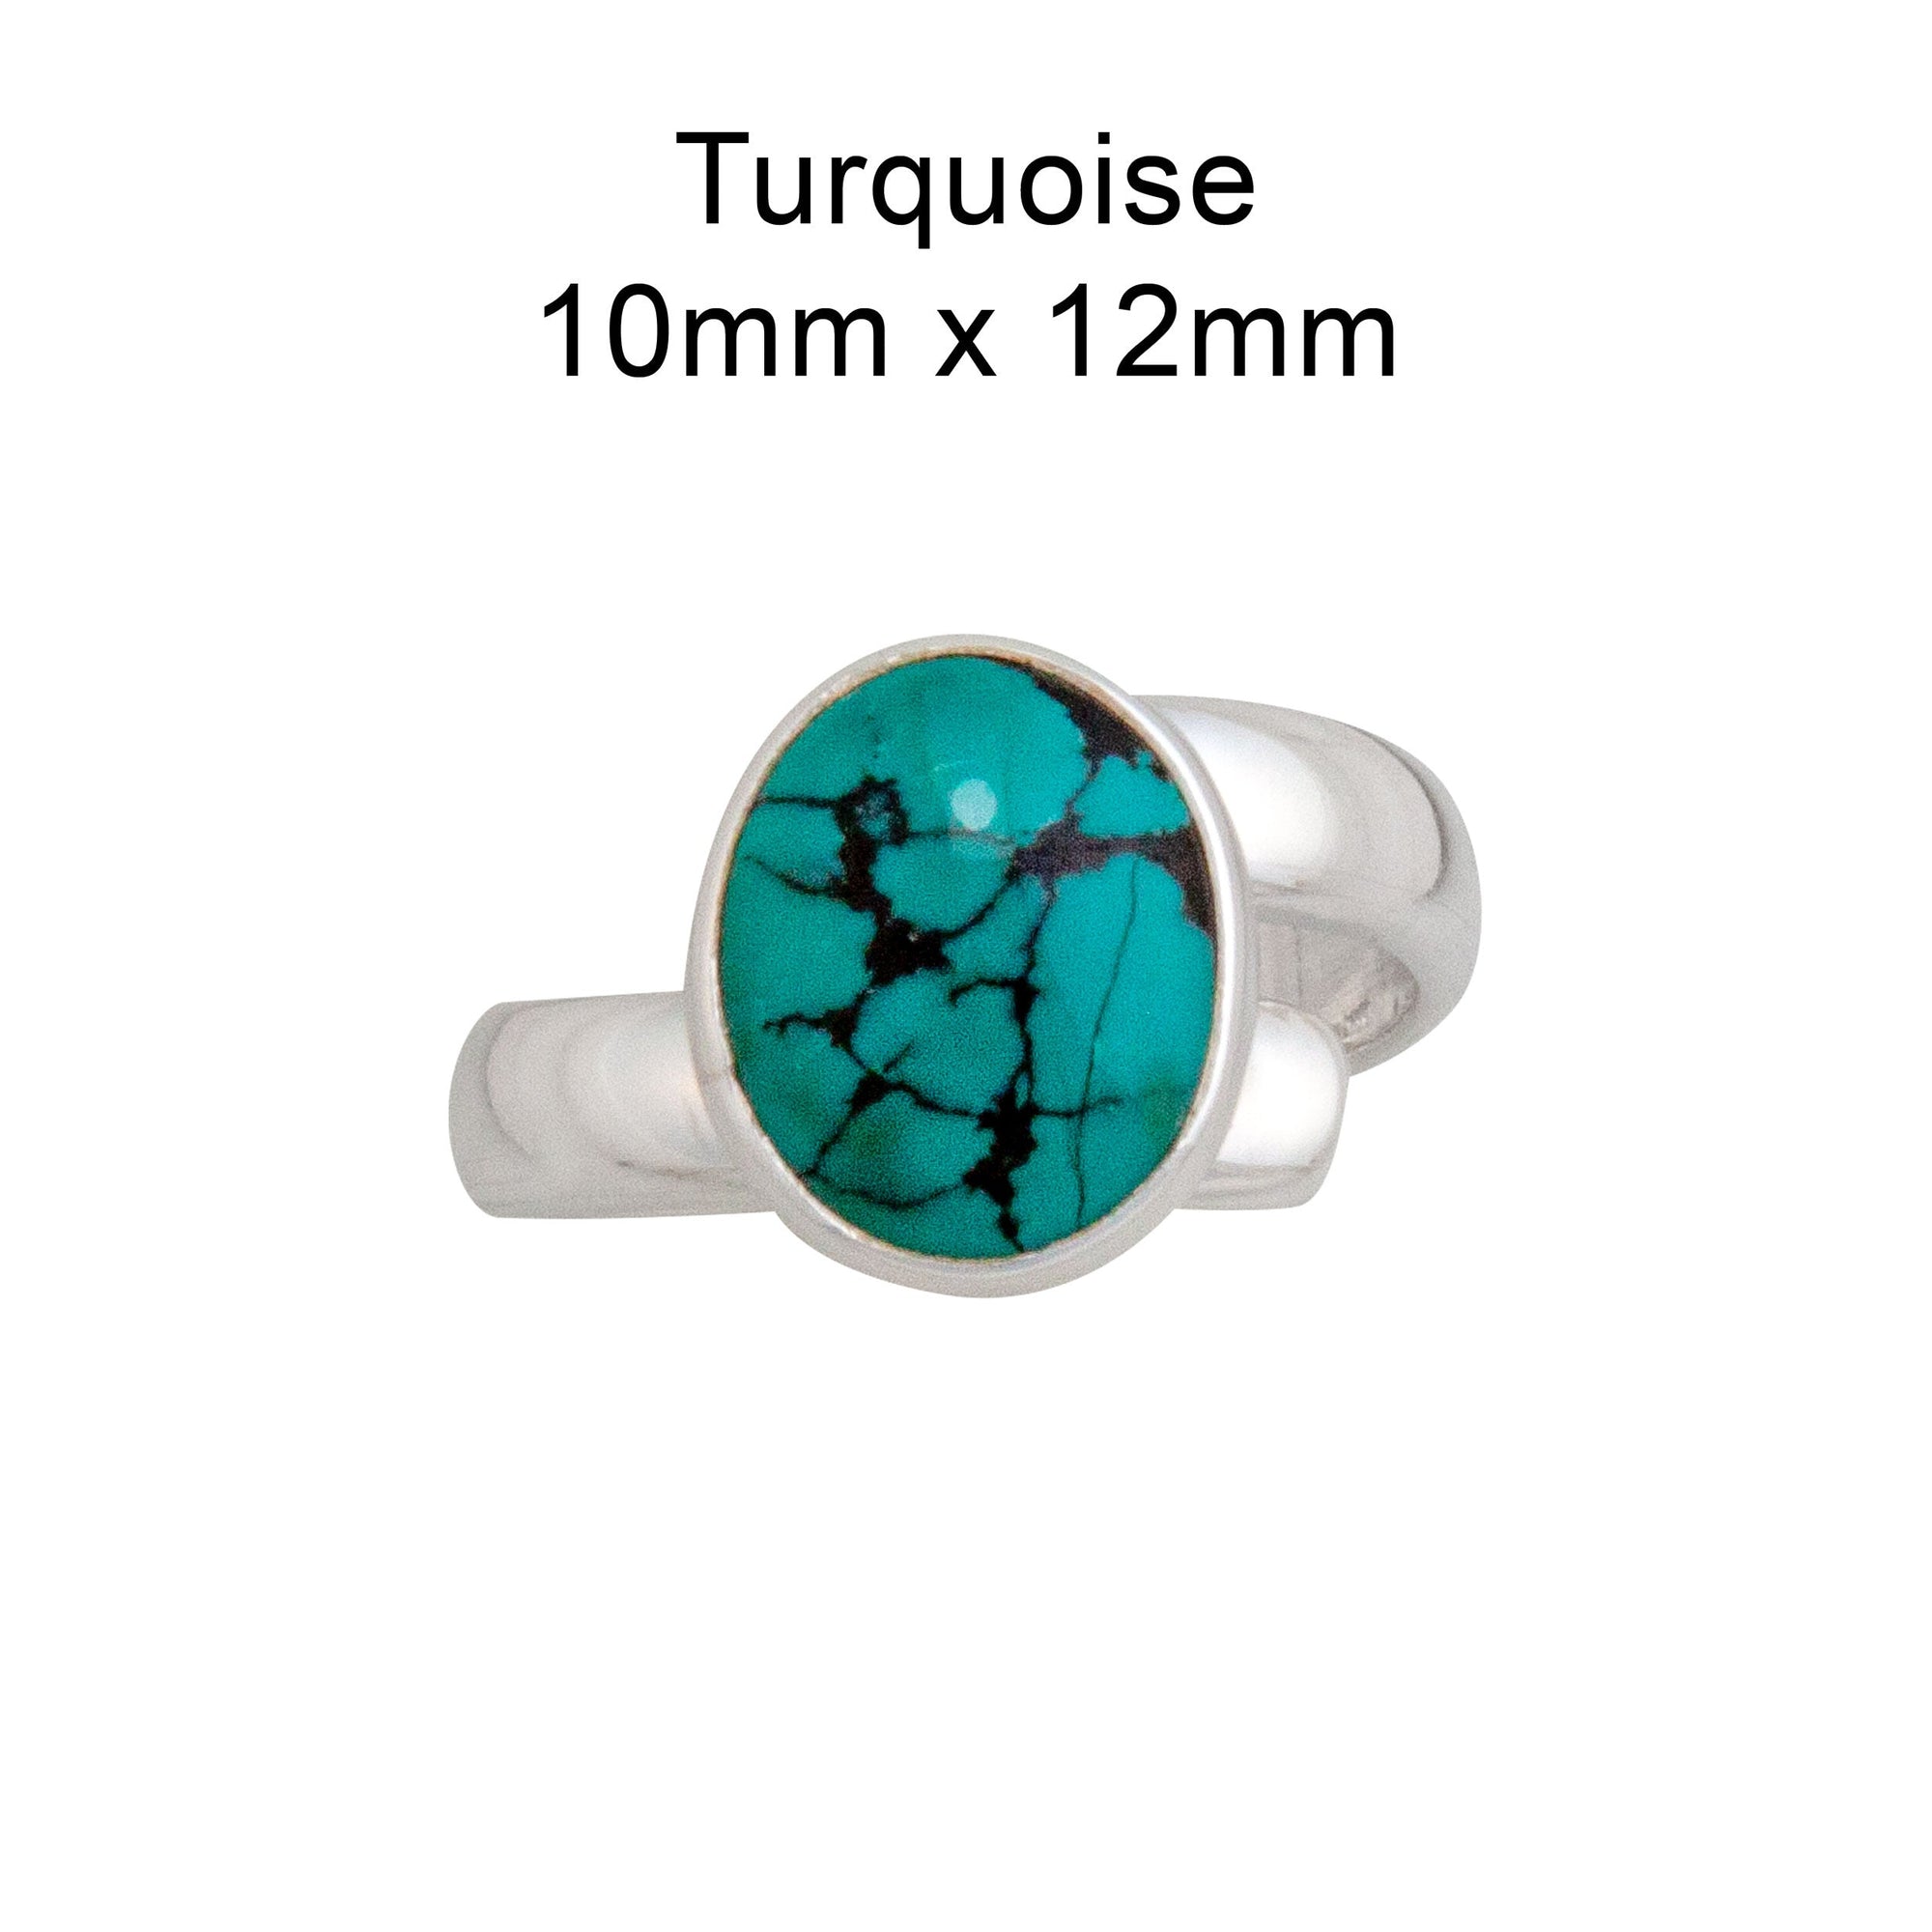 Sterling Silver Turquoise Petite Adjustable Ring | Charles Albert Jewelry